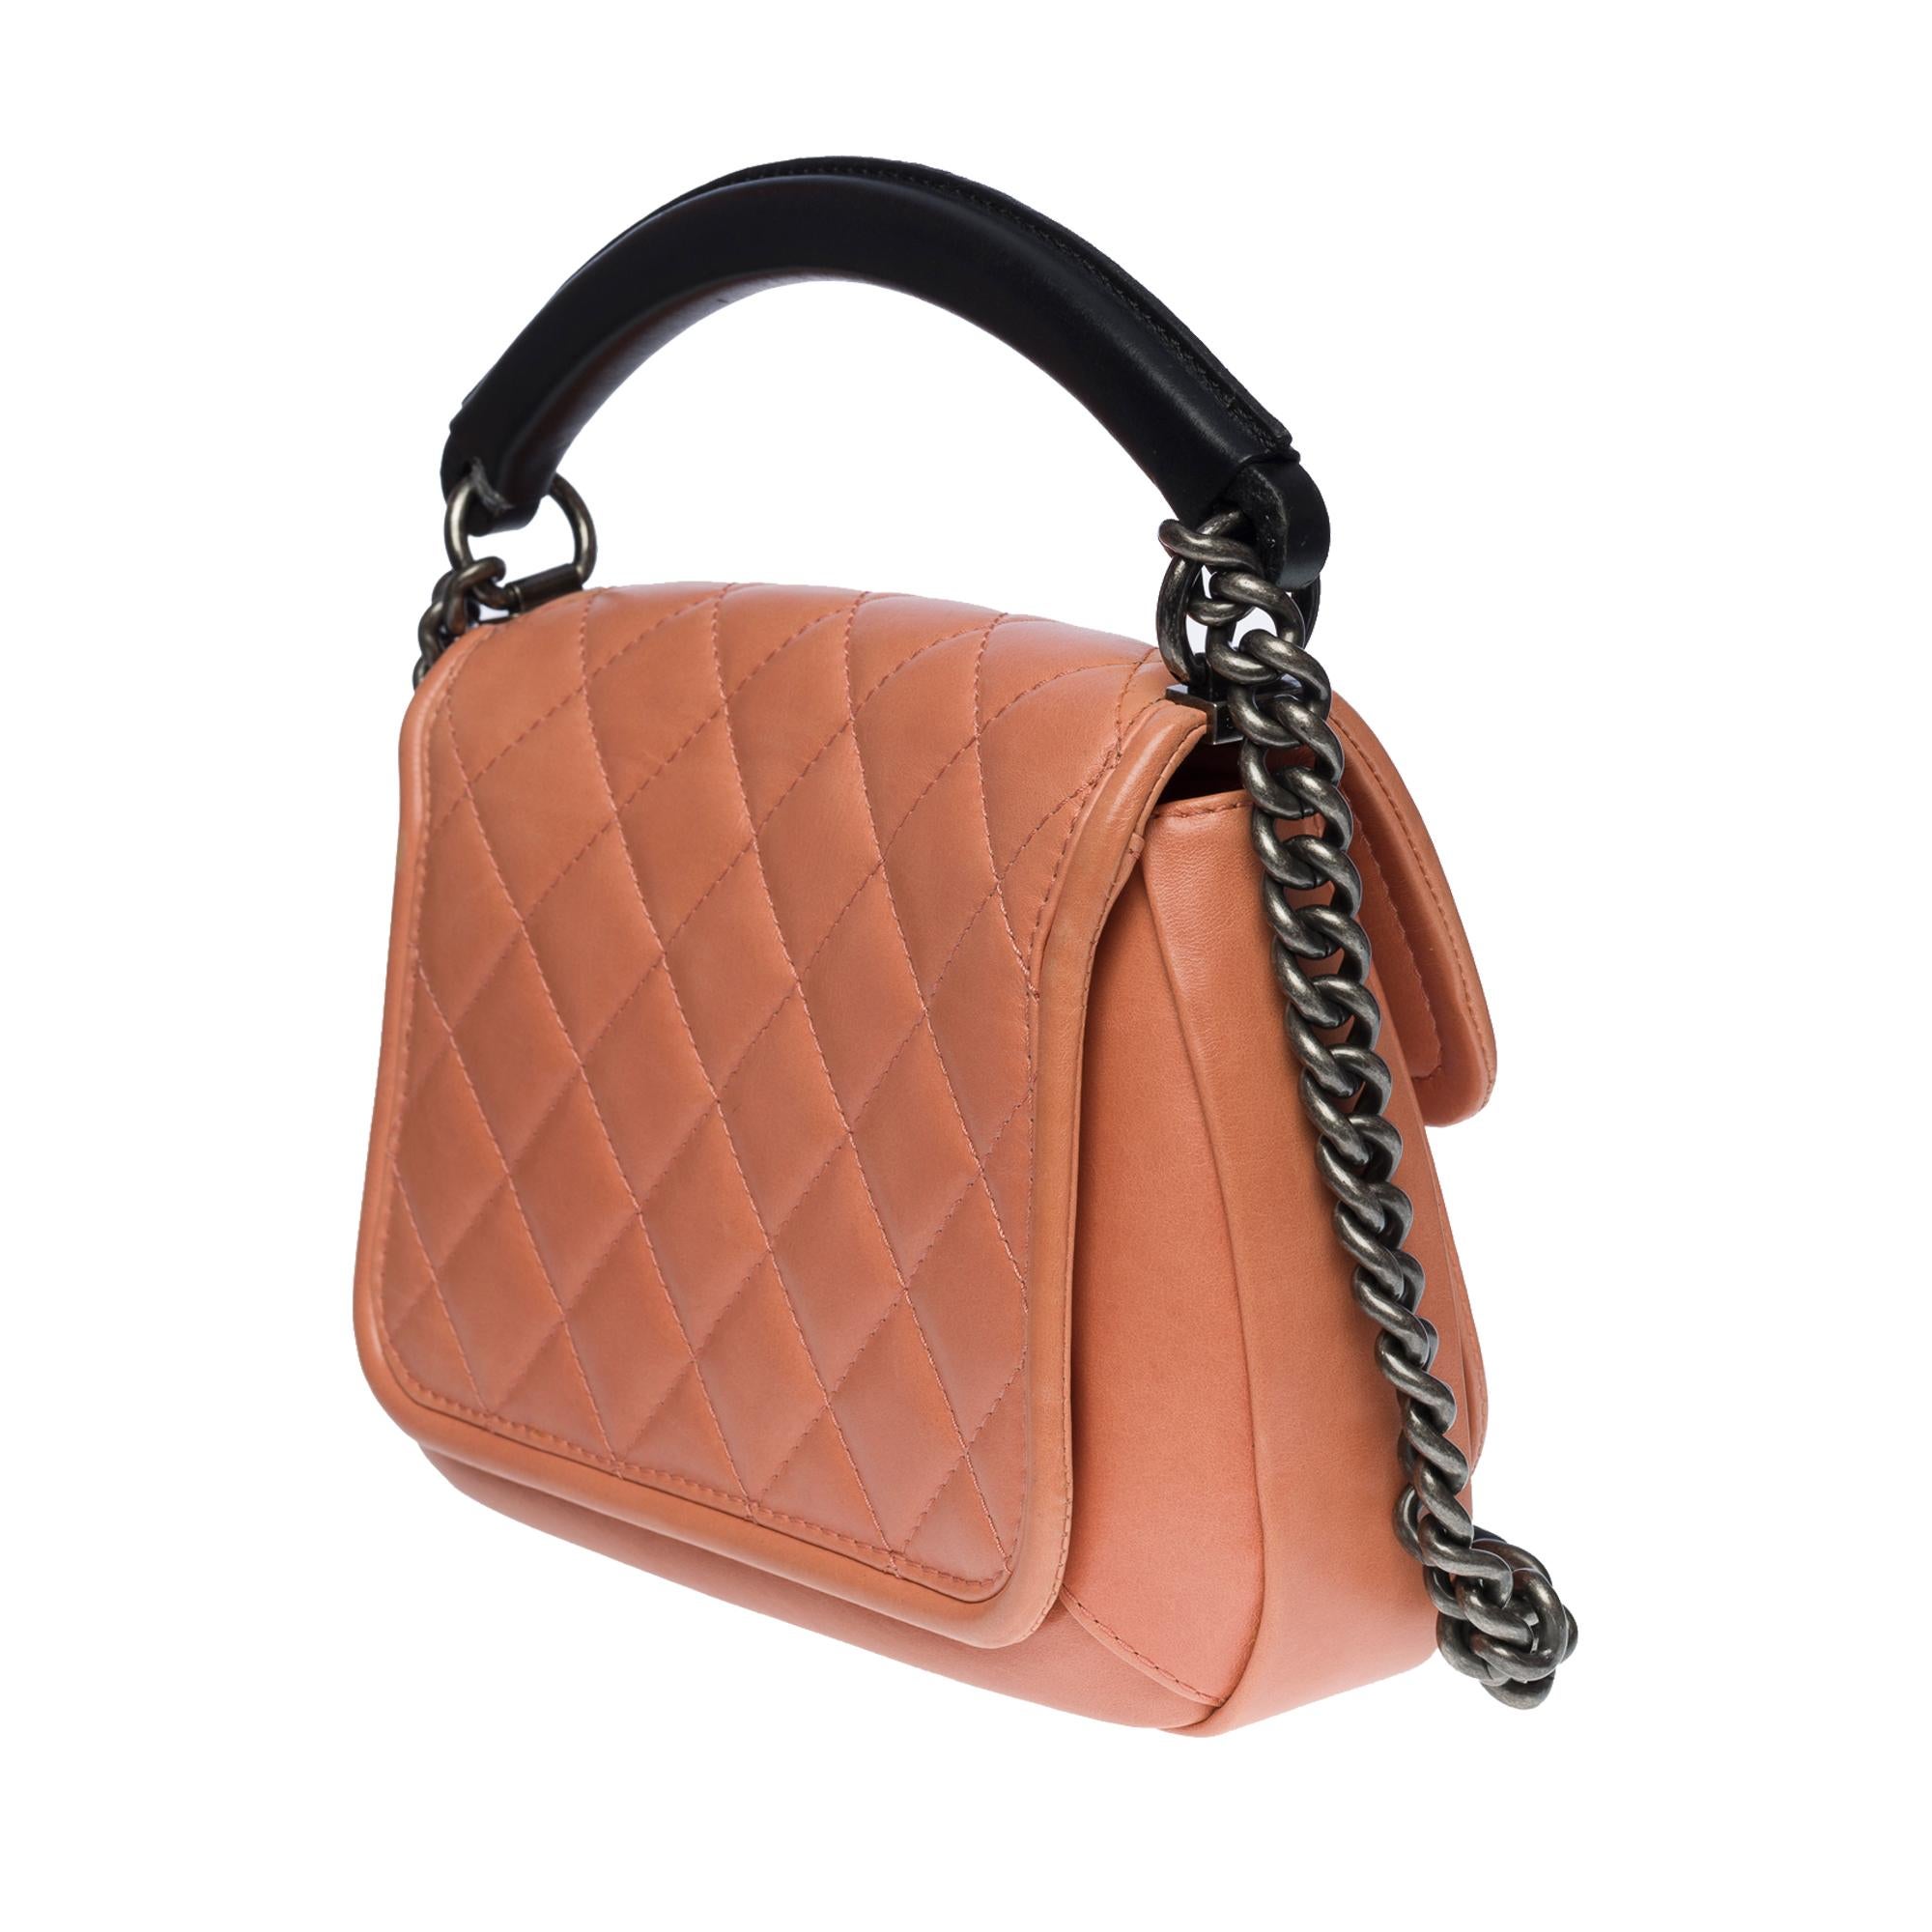 Rare Chanel Classic shoulder flap bag in Pink quilted lambskin leather, RSHW For Sale 1